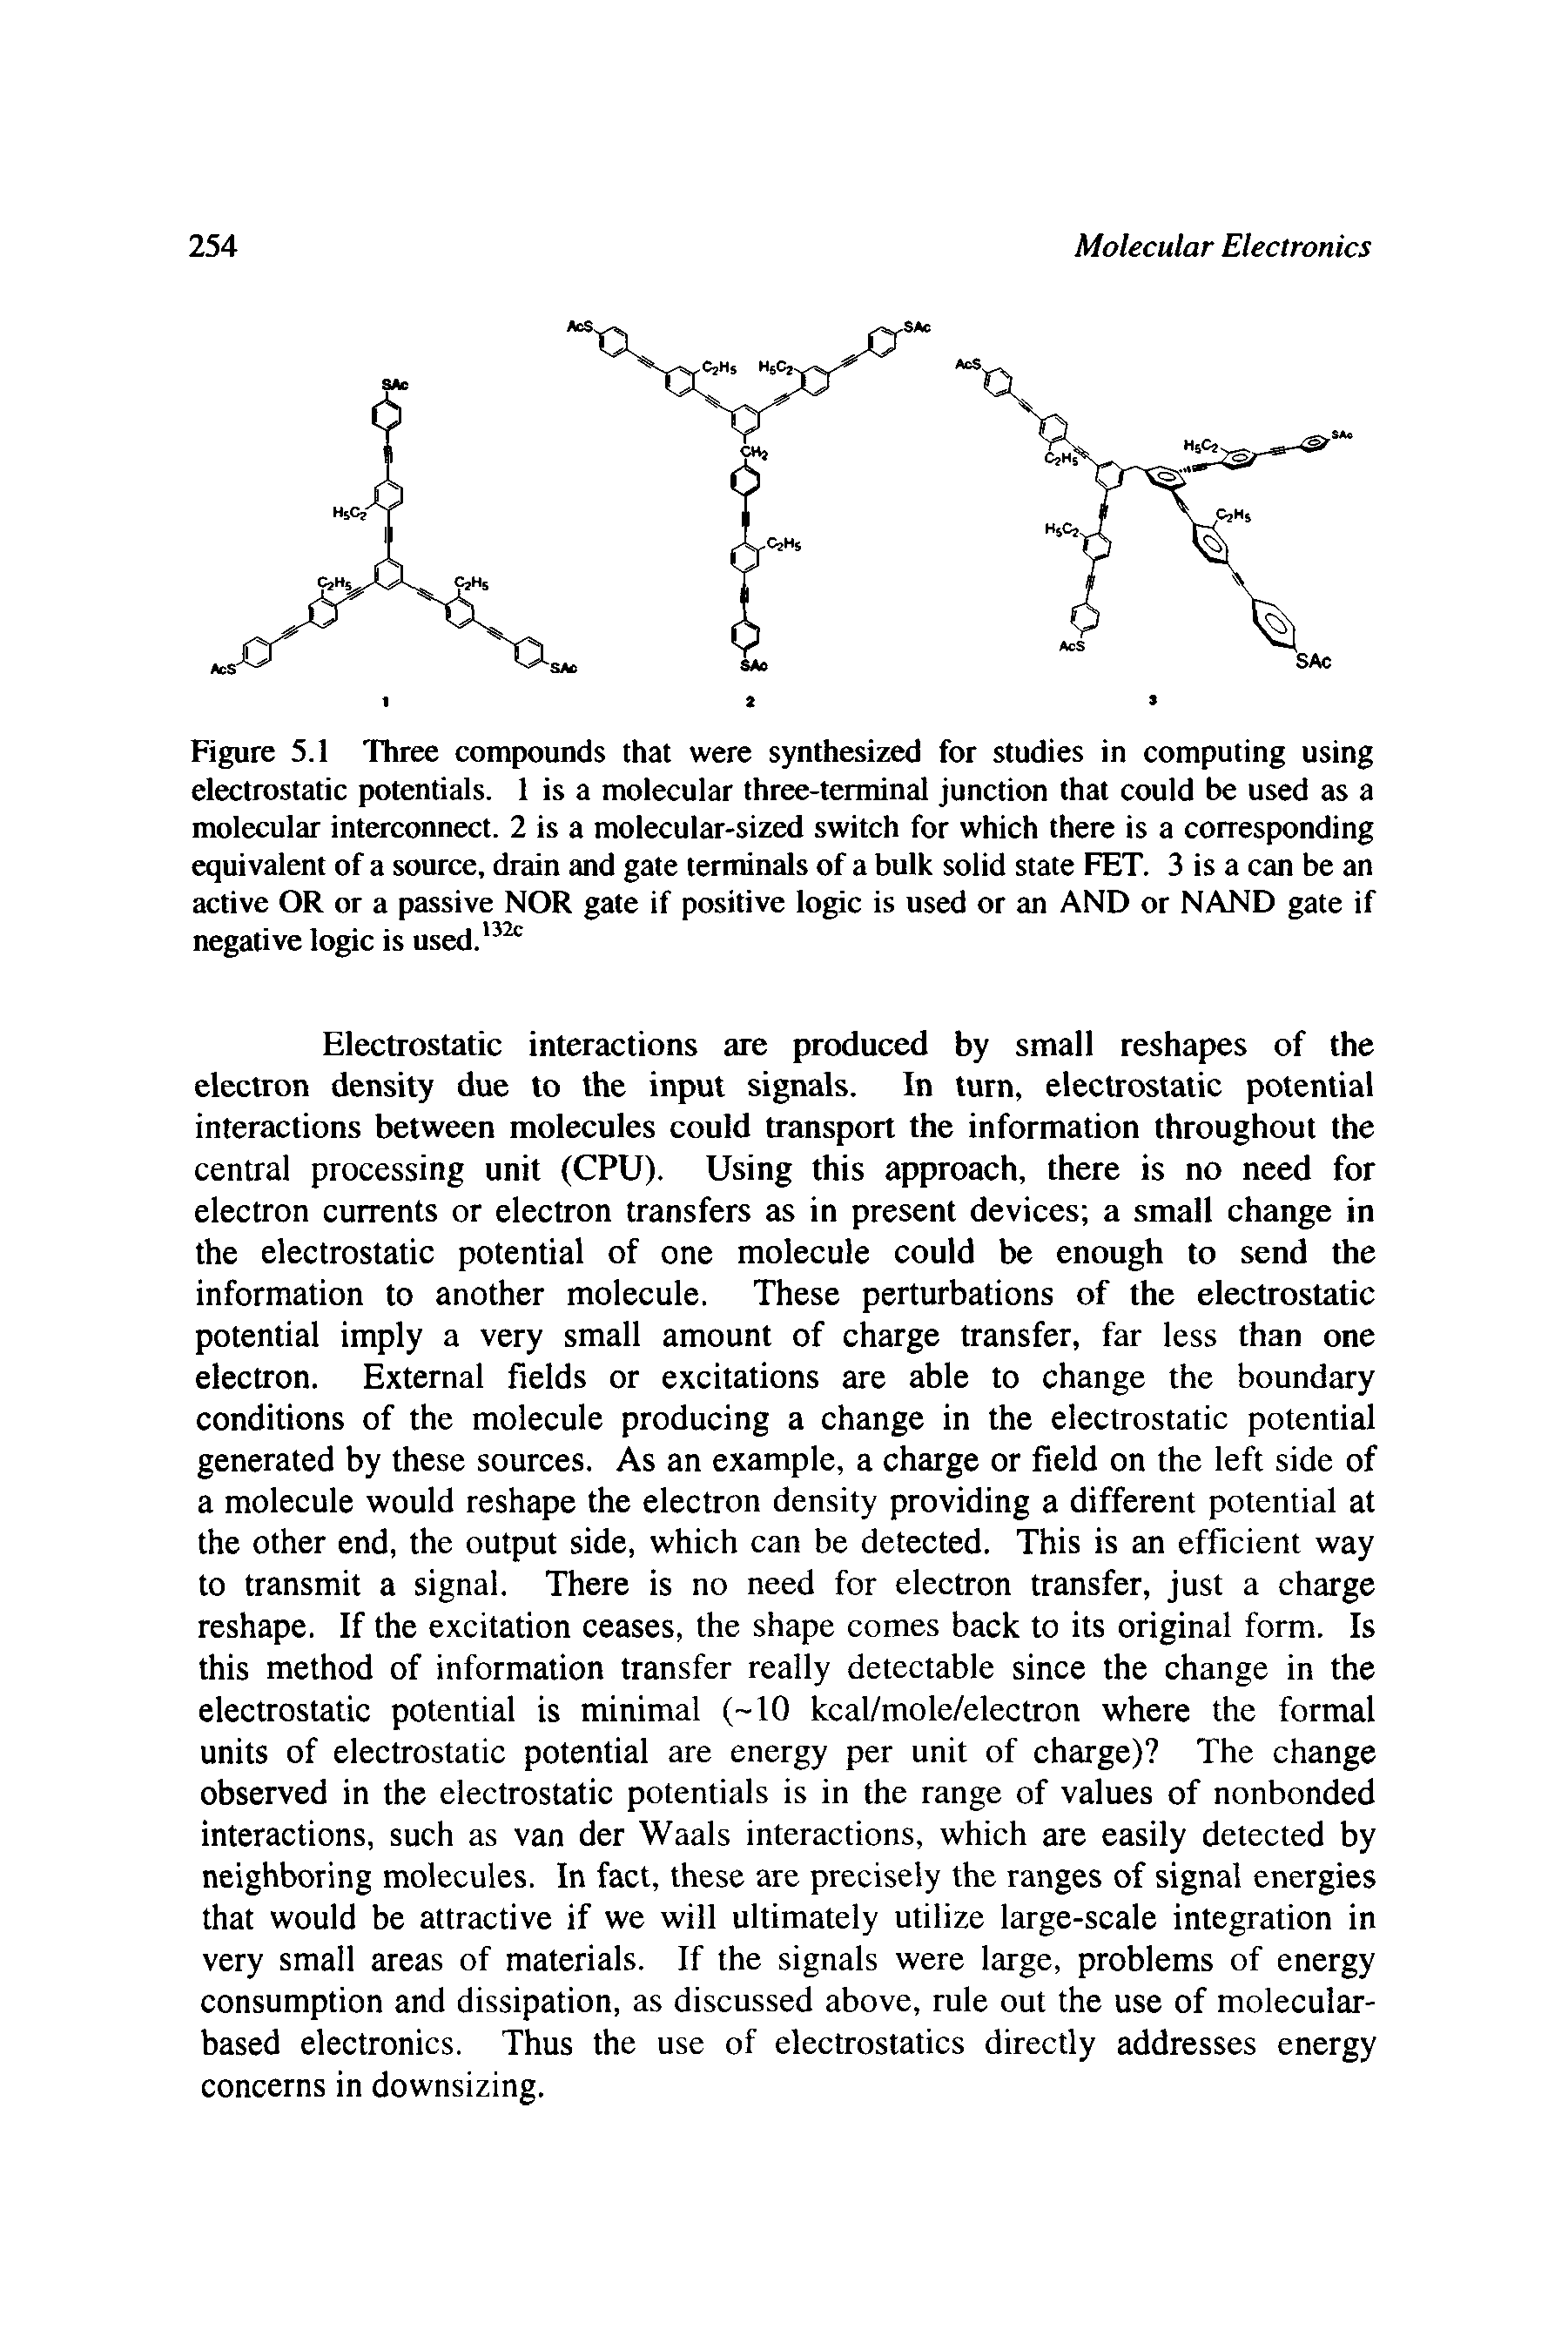 Figure 5.1 Three compounds that were synthesized for studies in computing using electrostatic potentials. 1 is a molecular three-terminal junction that could be used as a molecular interconnect. 2 is a molecular-sized switch for which there is a corresponding equivalent of a source, drain and gate terminals of a bulk solid state FET. 3 is a can be an active OR or a passive NOR gate if positive logic is used or an AND or NAND gate if negative logic is used. ...